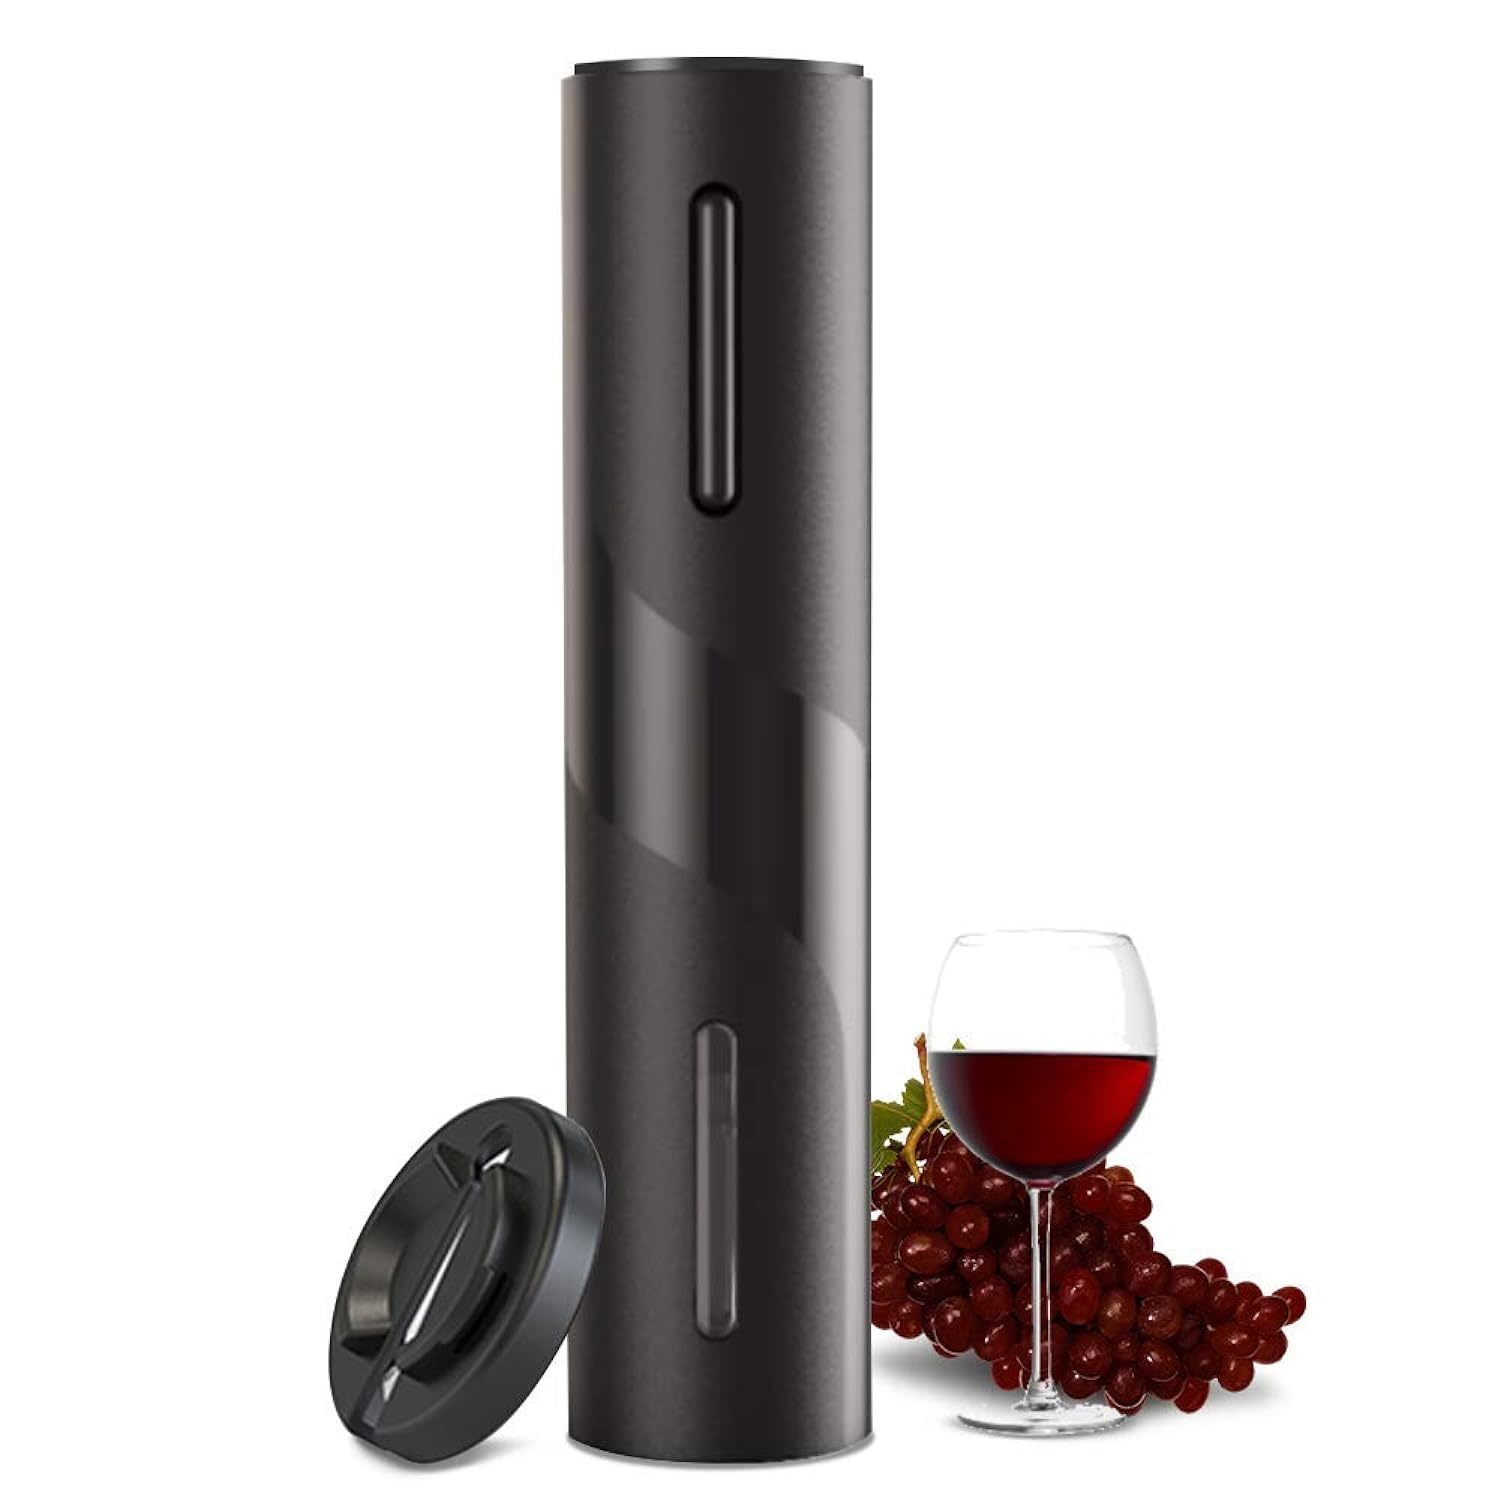 Primary image for Electric Wine Opener, Battery Operated Wine Bottle Openers With Foil Cutter, One